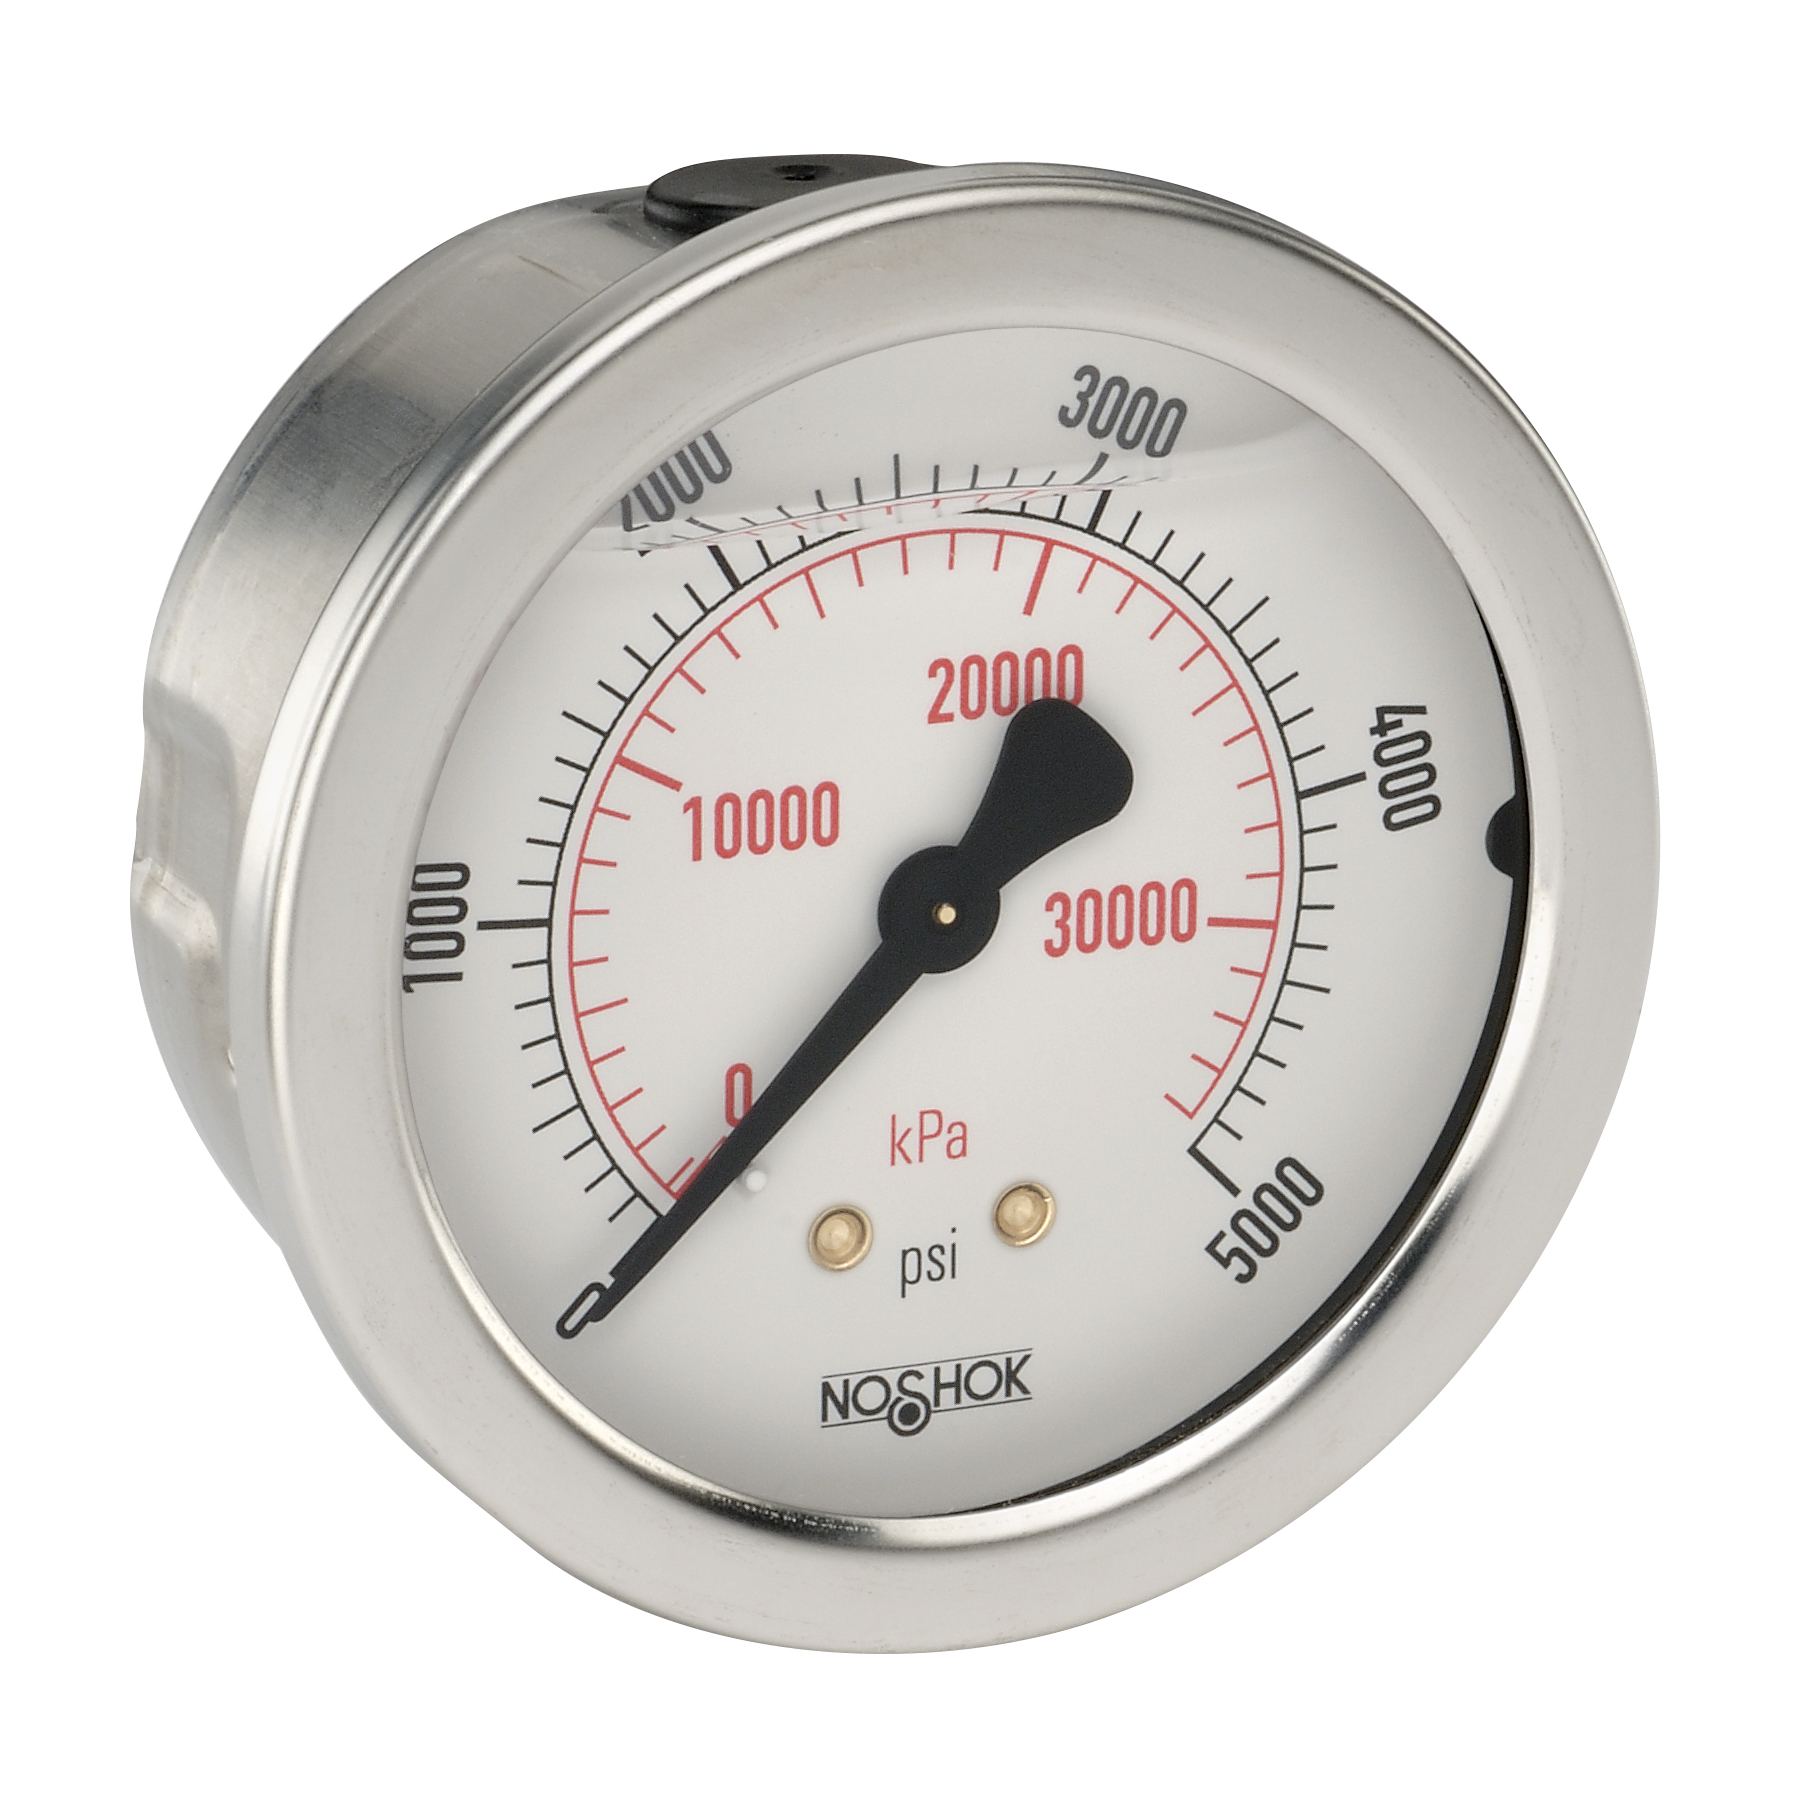 25-911-6000-psi/kPa-PMC-GY40 900 Series ABS and Stainless Steel Liquid Filled Pressure Gauges